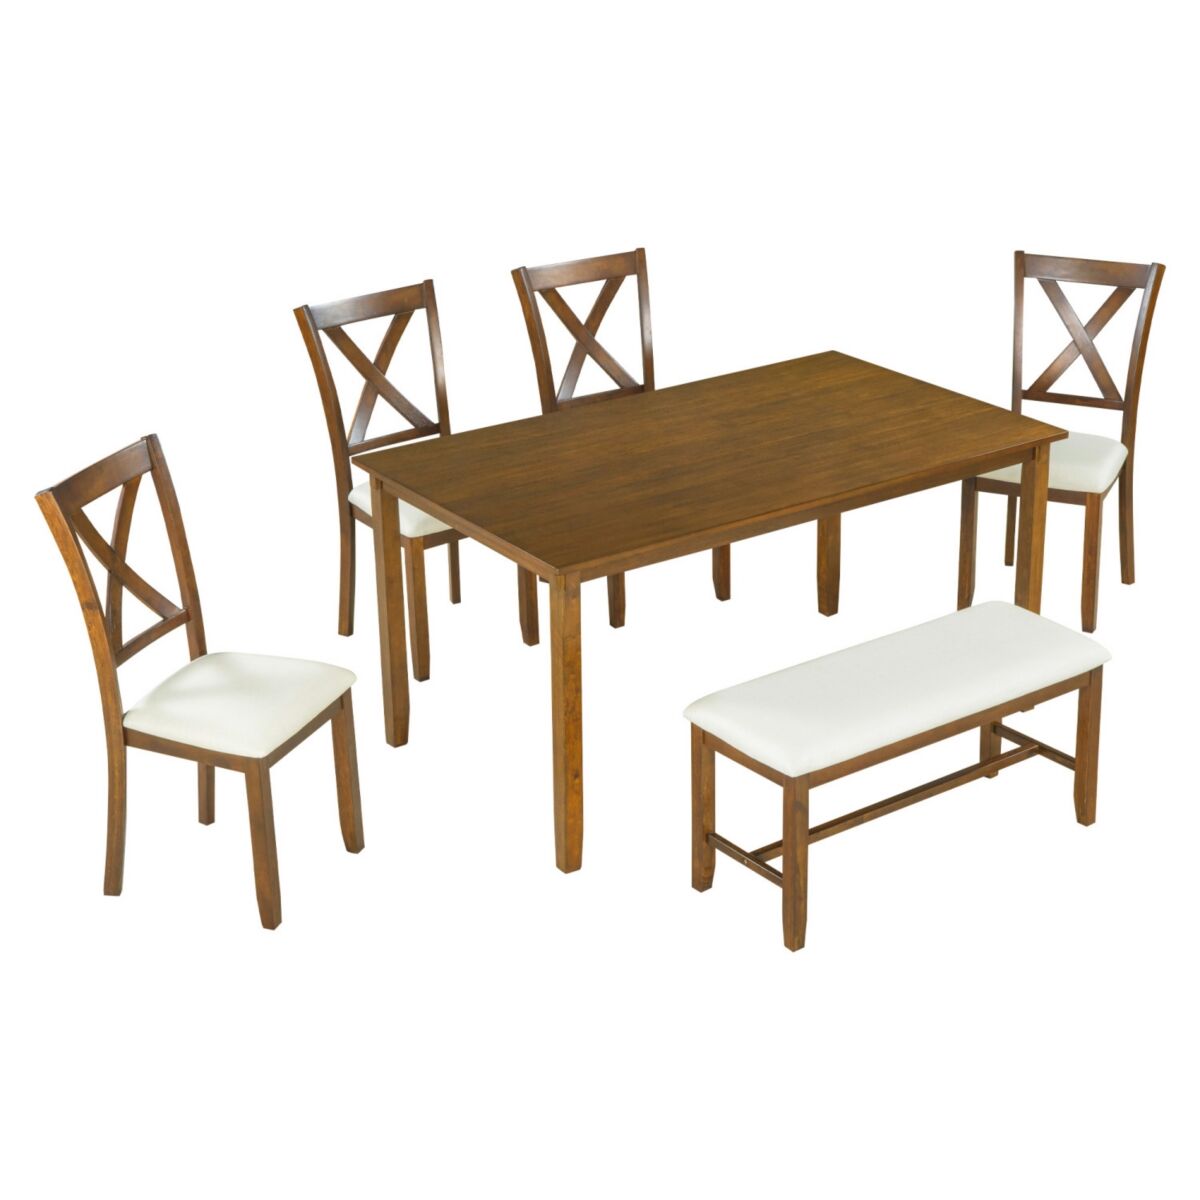 Simplie Fun 6-Piece Kitchen Dining Table Set Wooden Rectangular Dining Table, 4 Fabric Chairs and Bench Family Furniture (Natural Cherry) - Brown